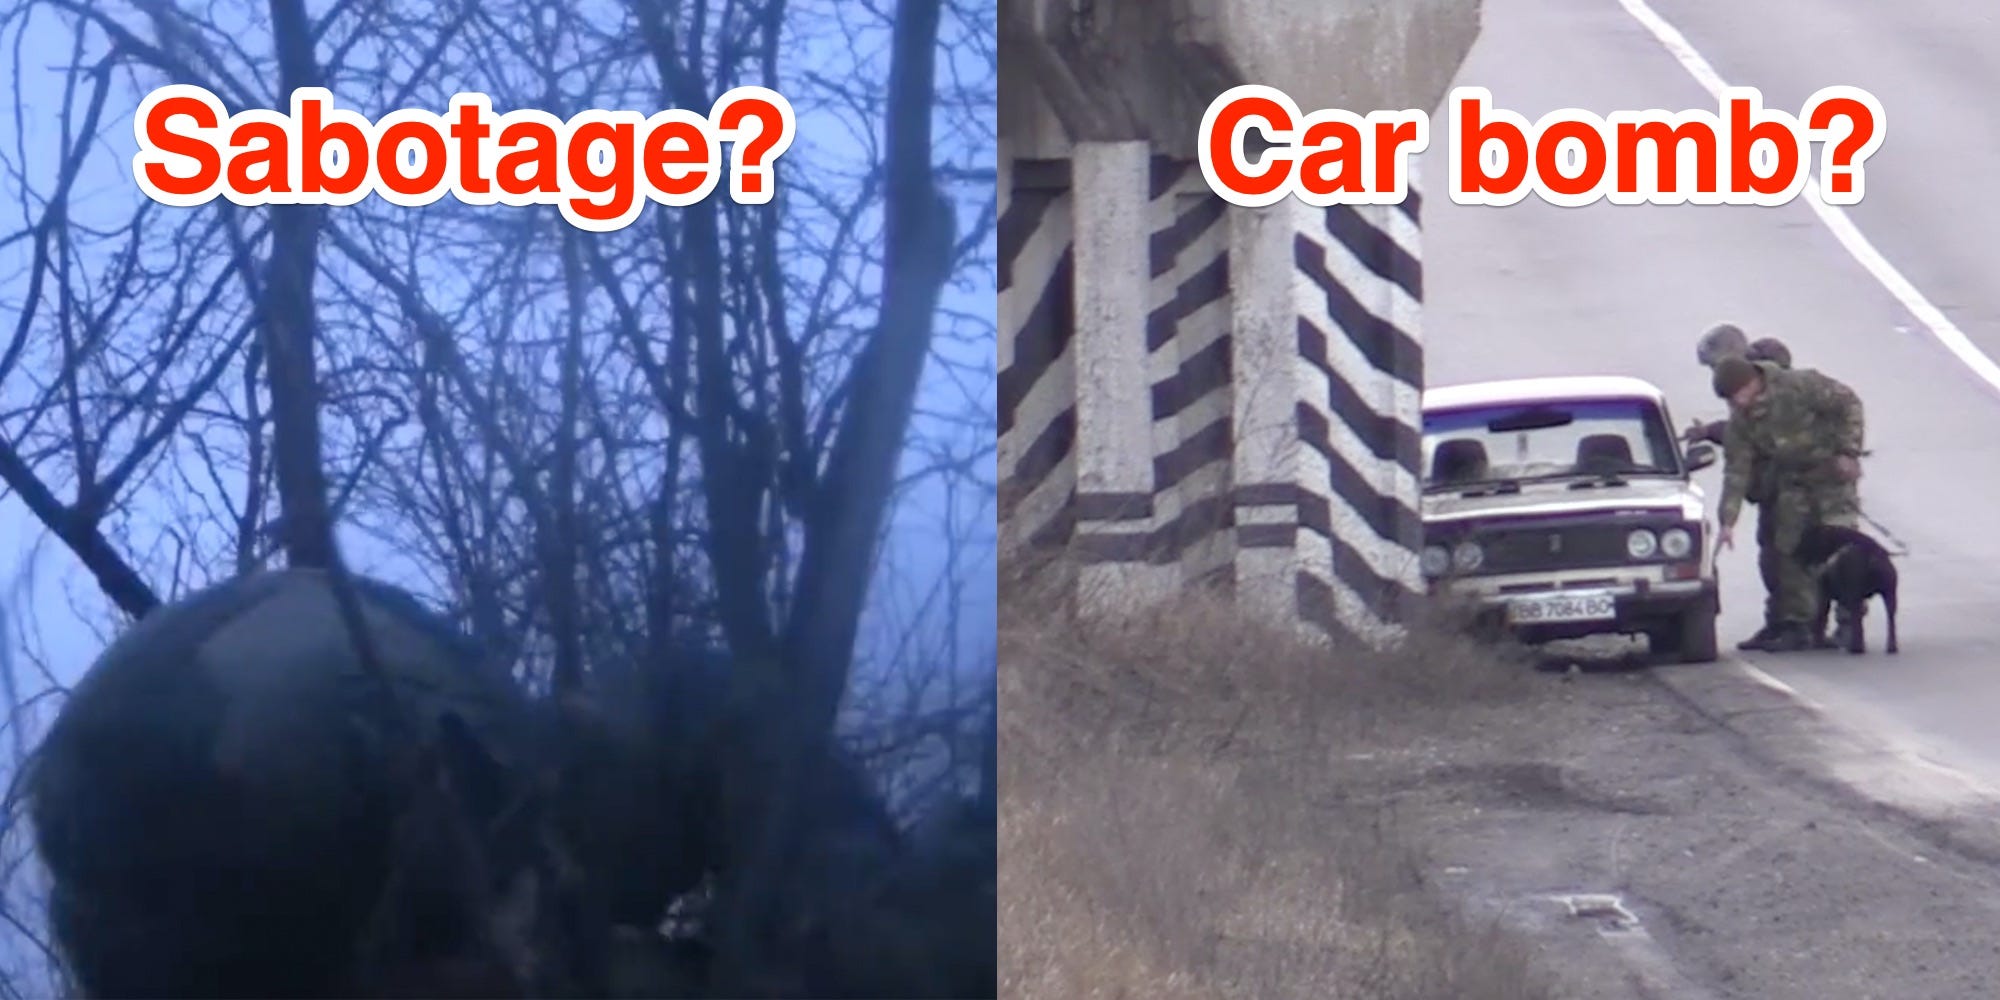 Screengrabs from two videos purporting to show (left) a sabotage operation and (right) a car bomb being removed in eastern Ukraine.